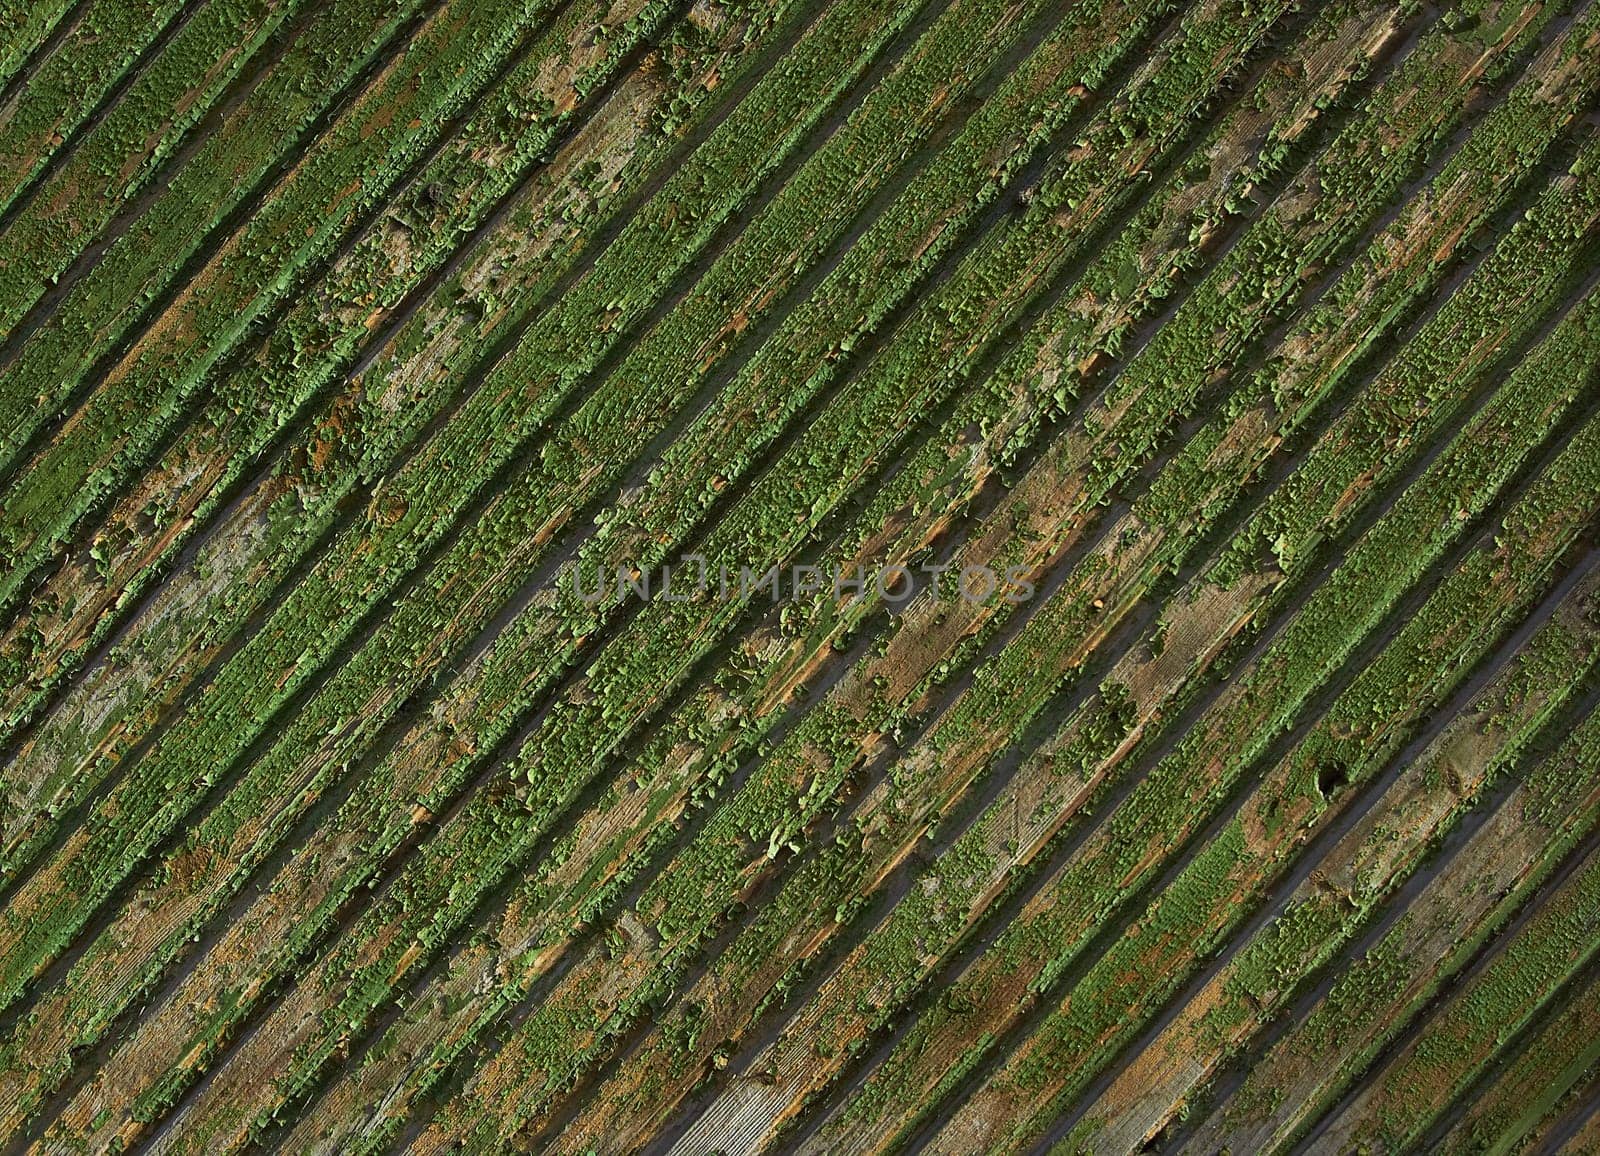 Green wall made of wooden boards as an abstract background texture by Севостьянов